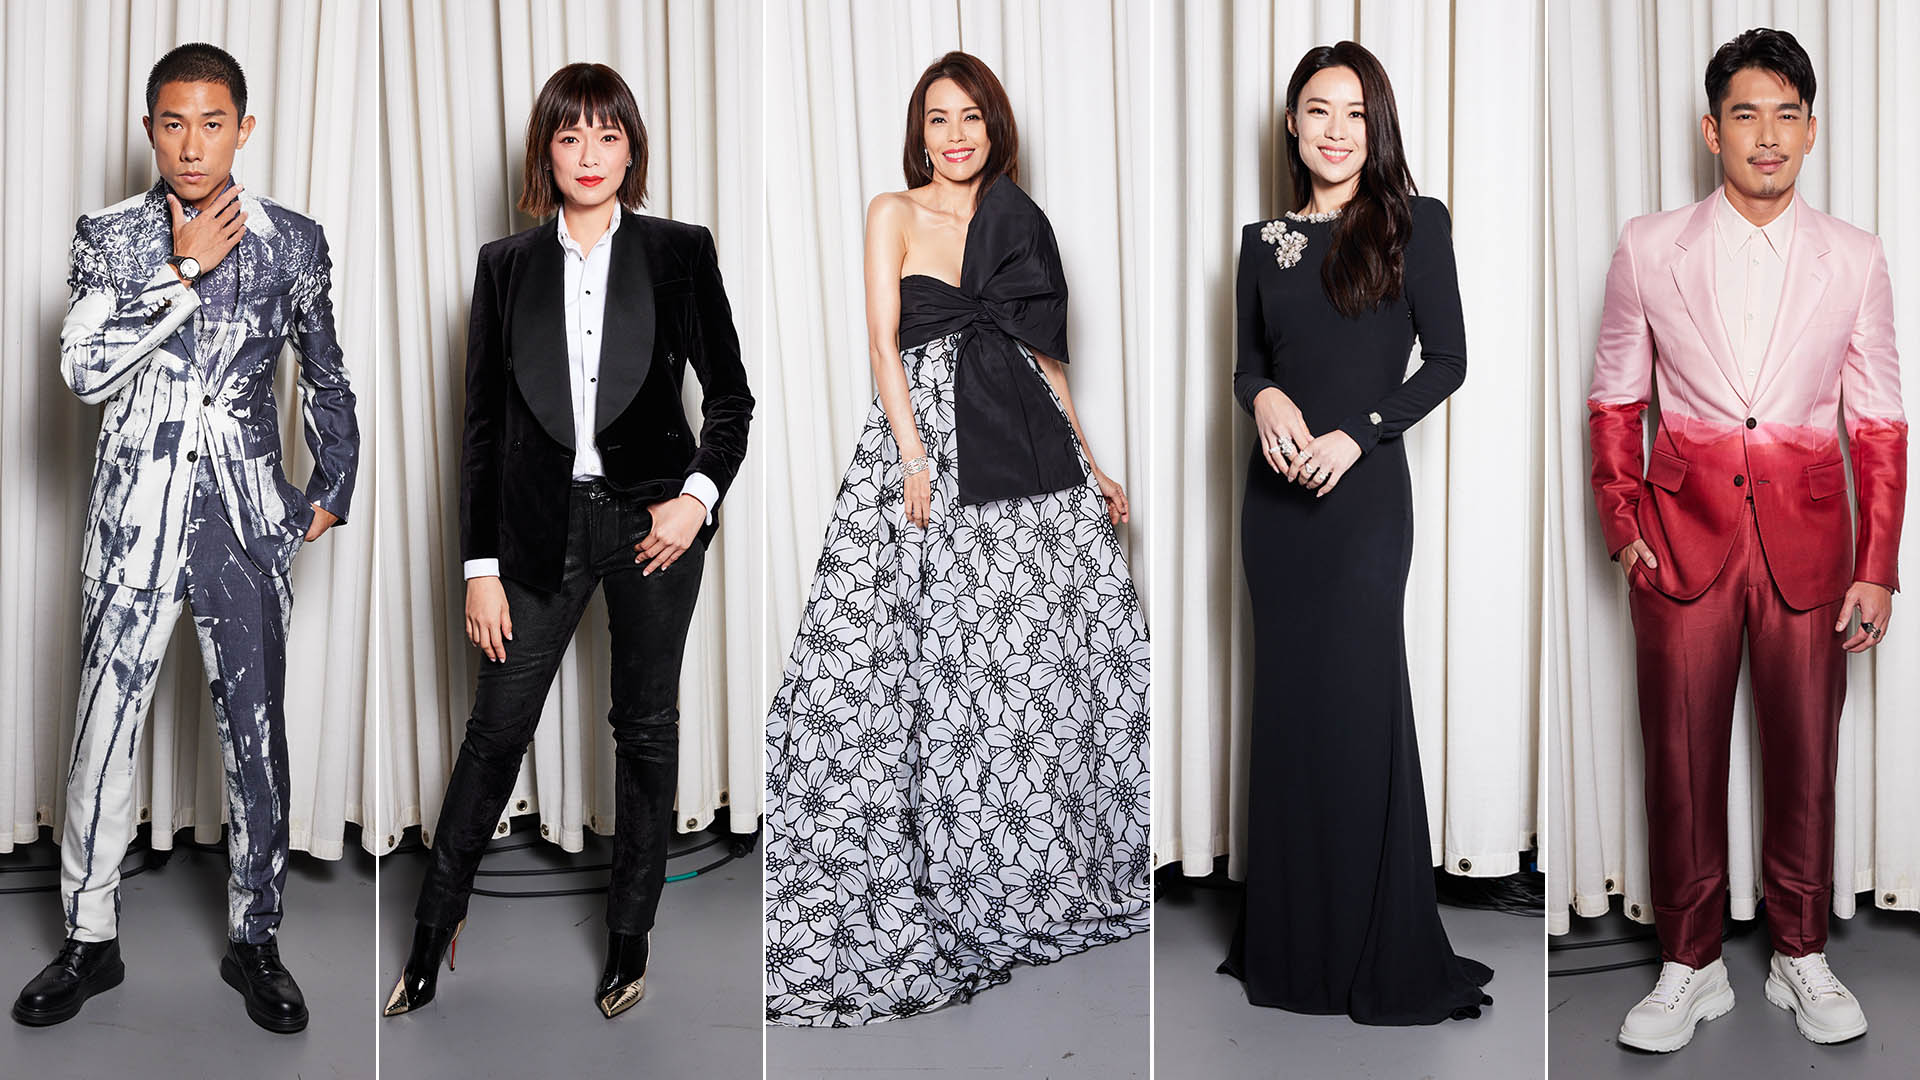 Star Awards 2021 Fashion: See All The Red Carpet Looks Here